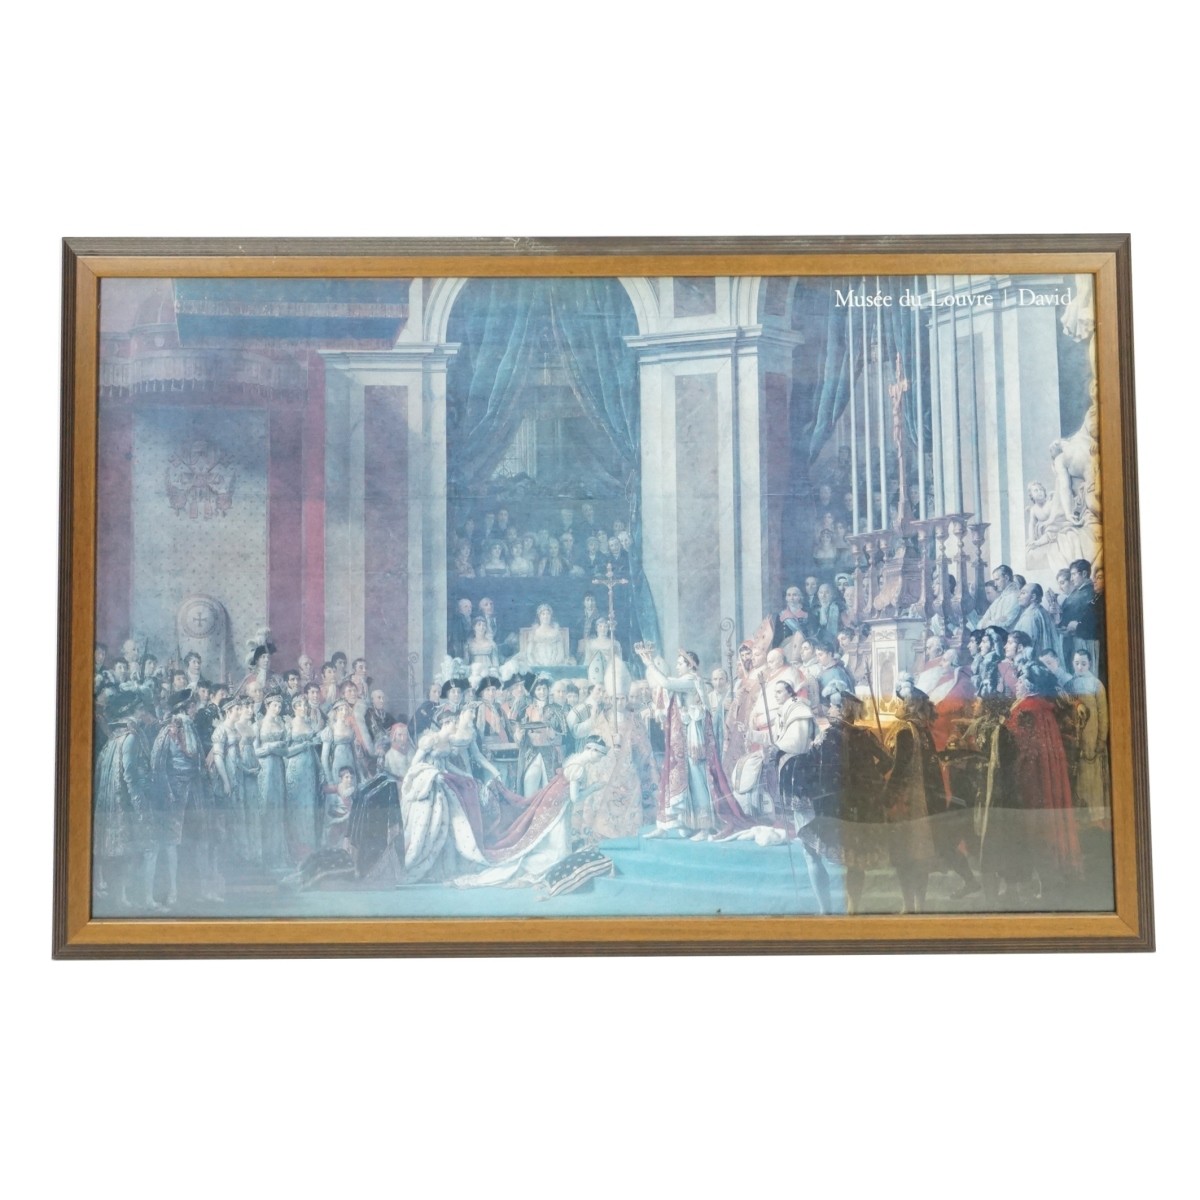 Musee du Louvre Print